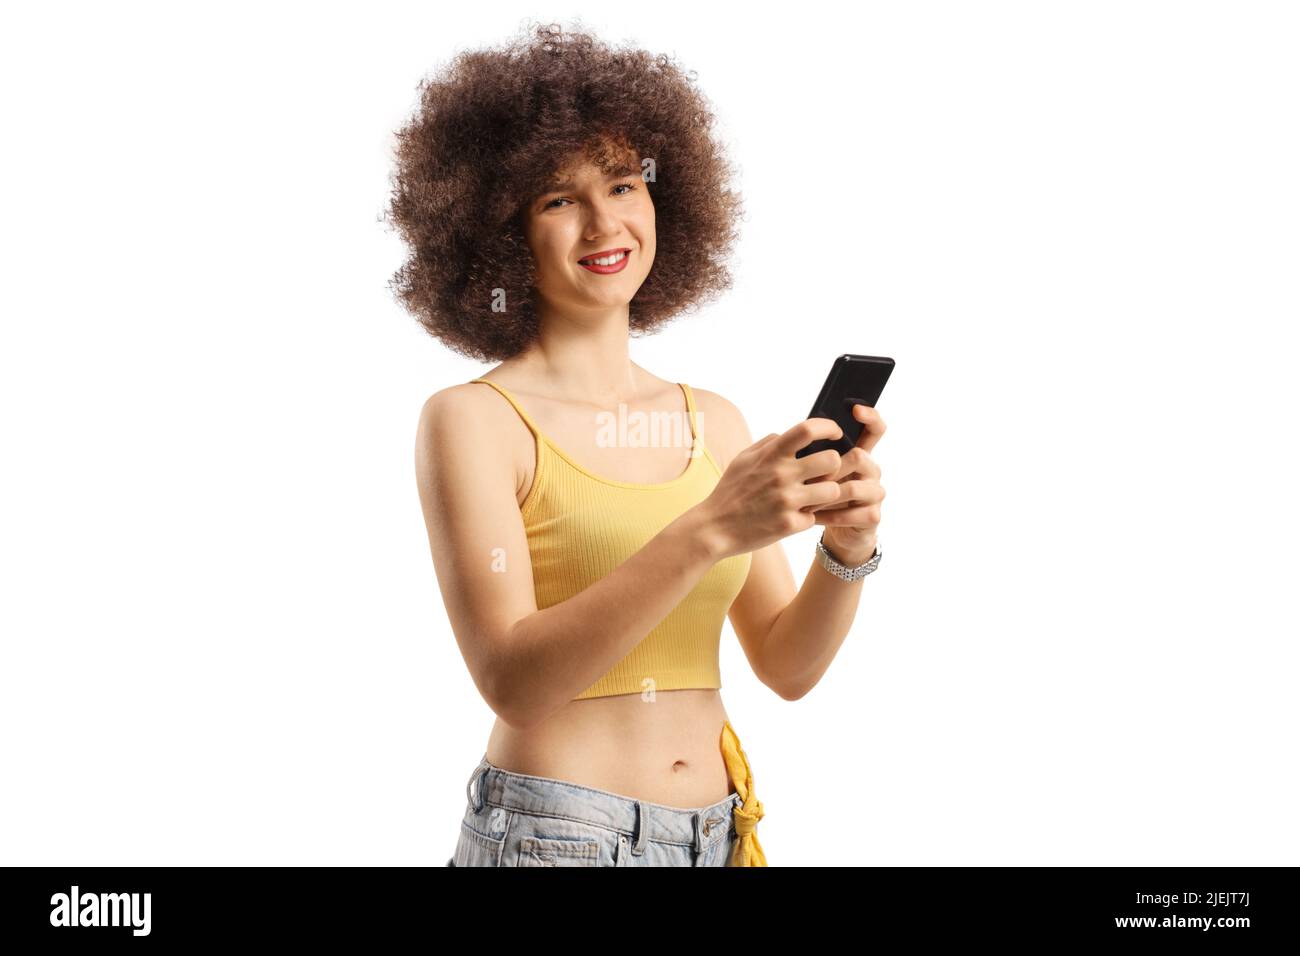 Young caucasian woman with afro hairstyle using a smartphone and looking at camera isolated on white background Stock Photo